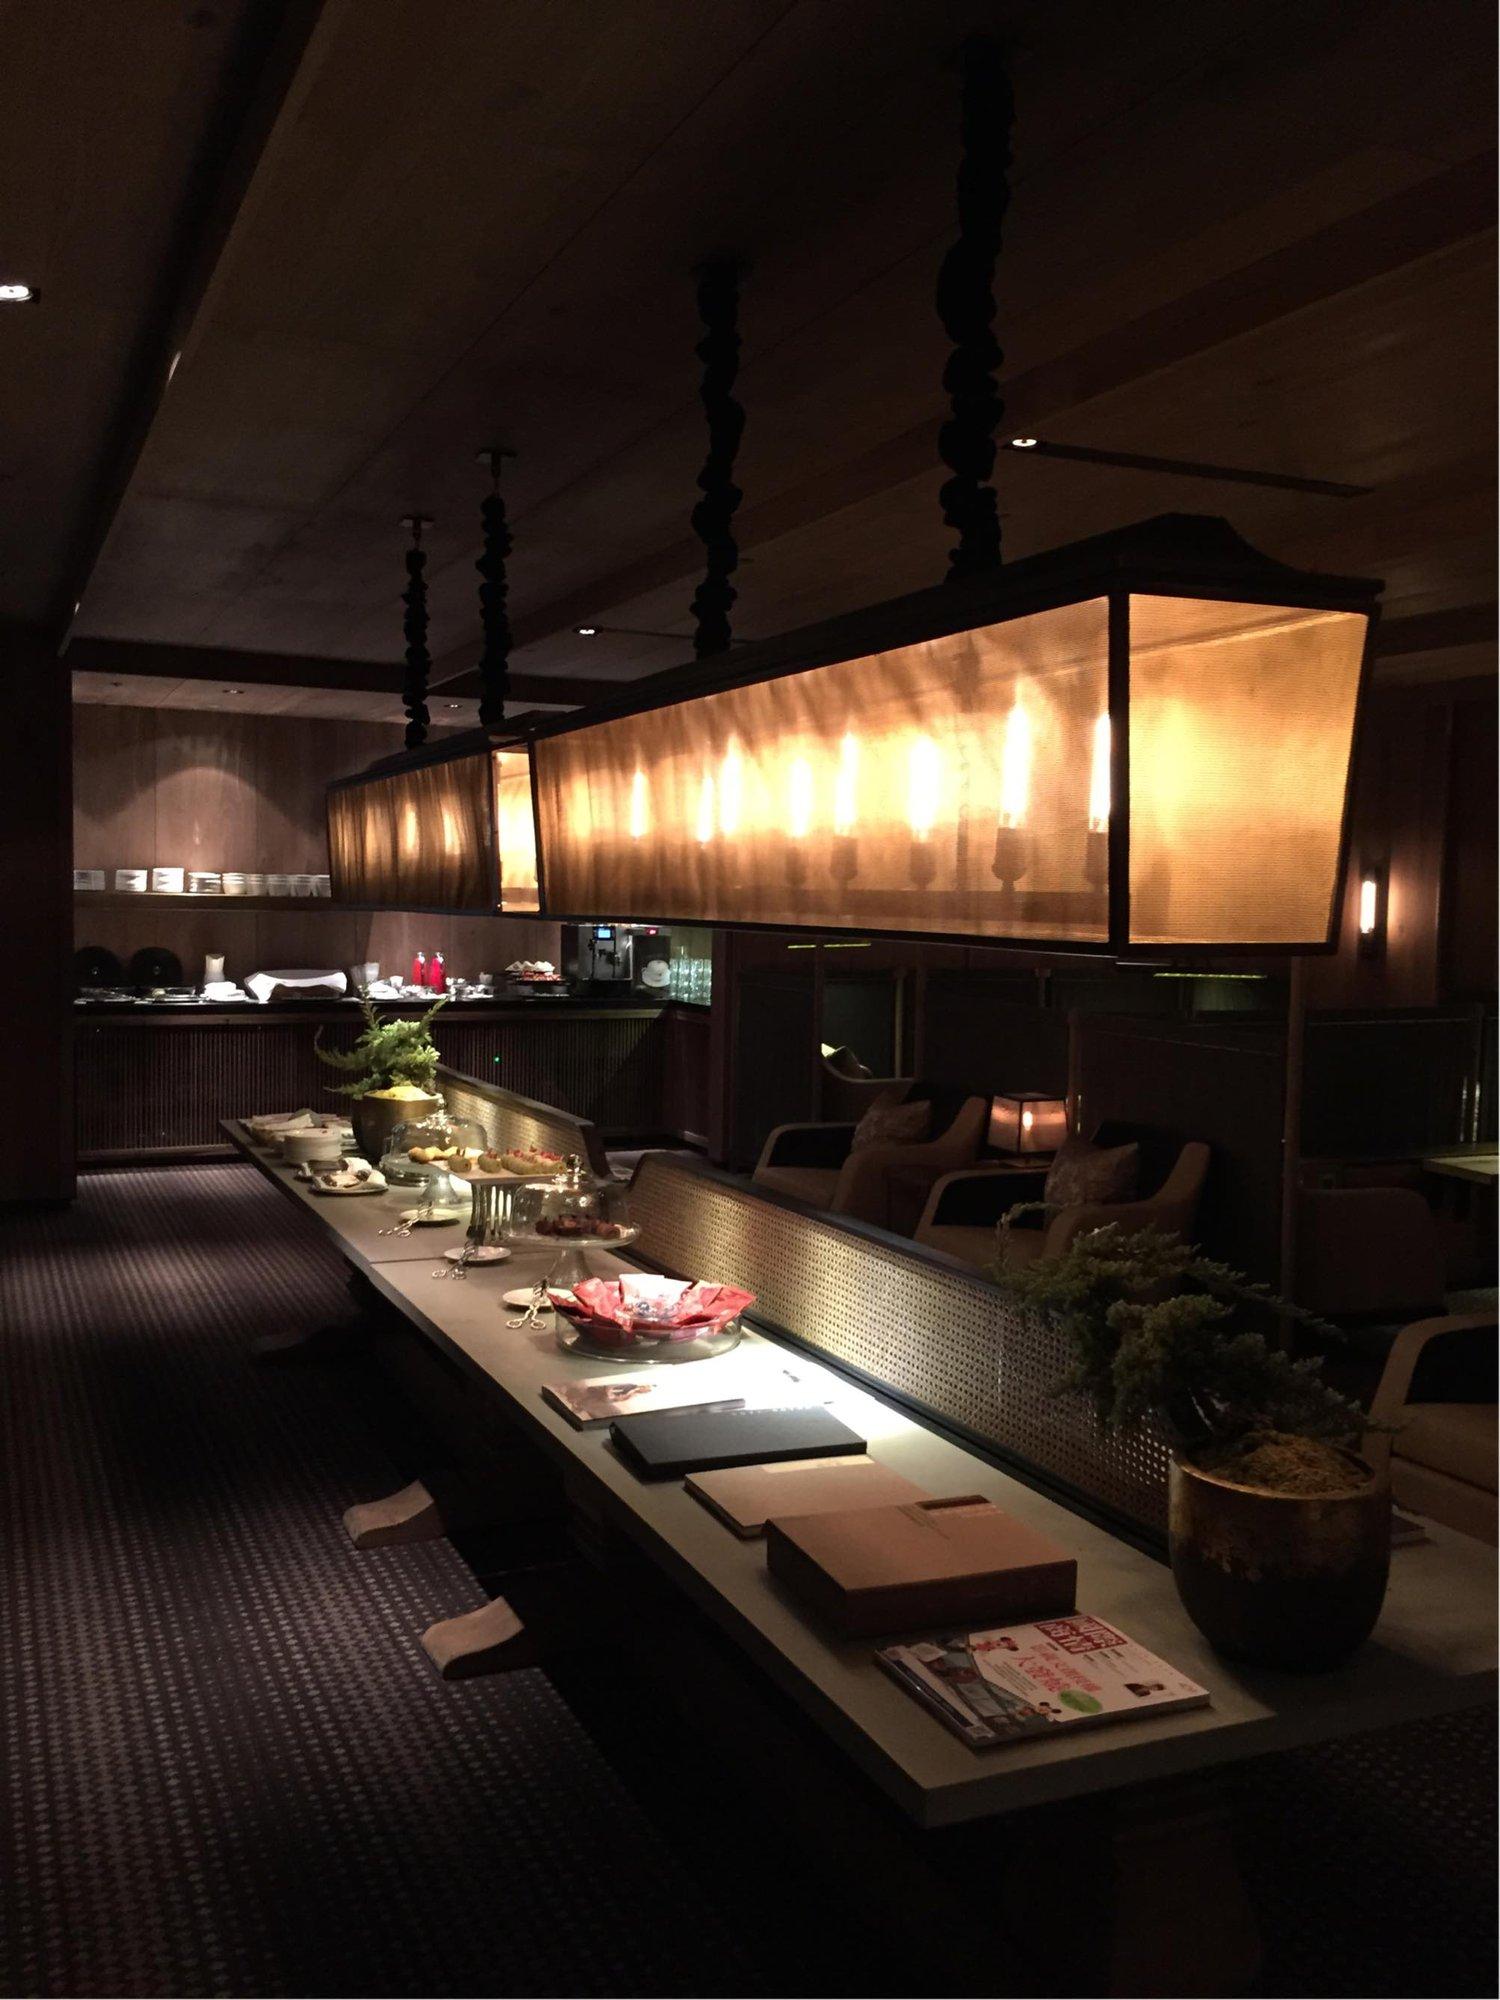 China Airlines Lounge (V1) image 15 of 44